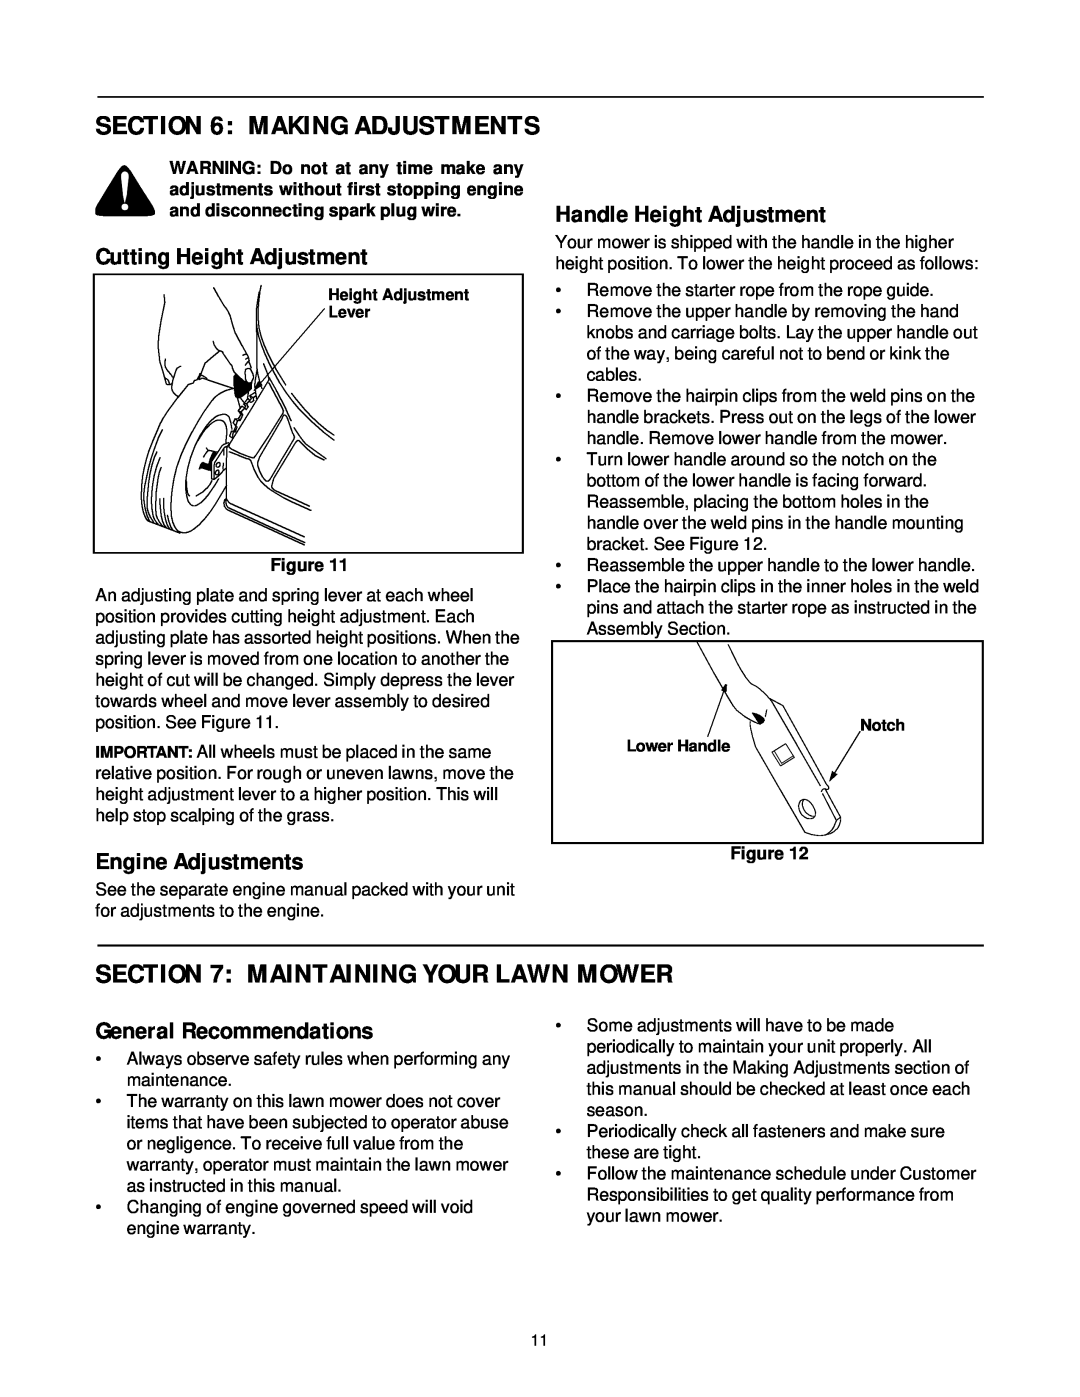 Yard-Man 11A-589C401 Maintaining Your Lawn Mower, Cutting Height Adjustment, Handle Height Adjustment, Engine Adjustments 